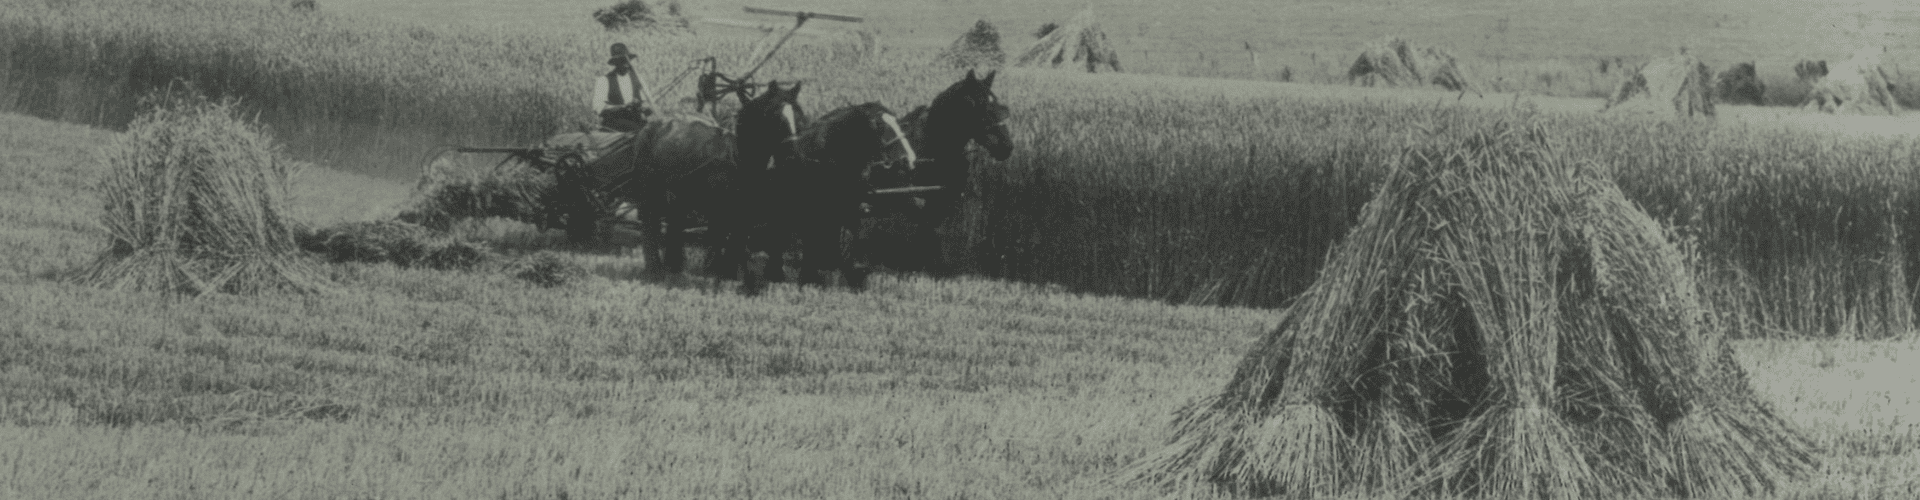 Horse and cart working in 1930 with Stooked hay in a paddock in Kapunda, South Australia.